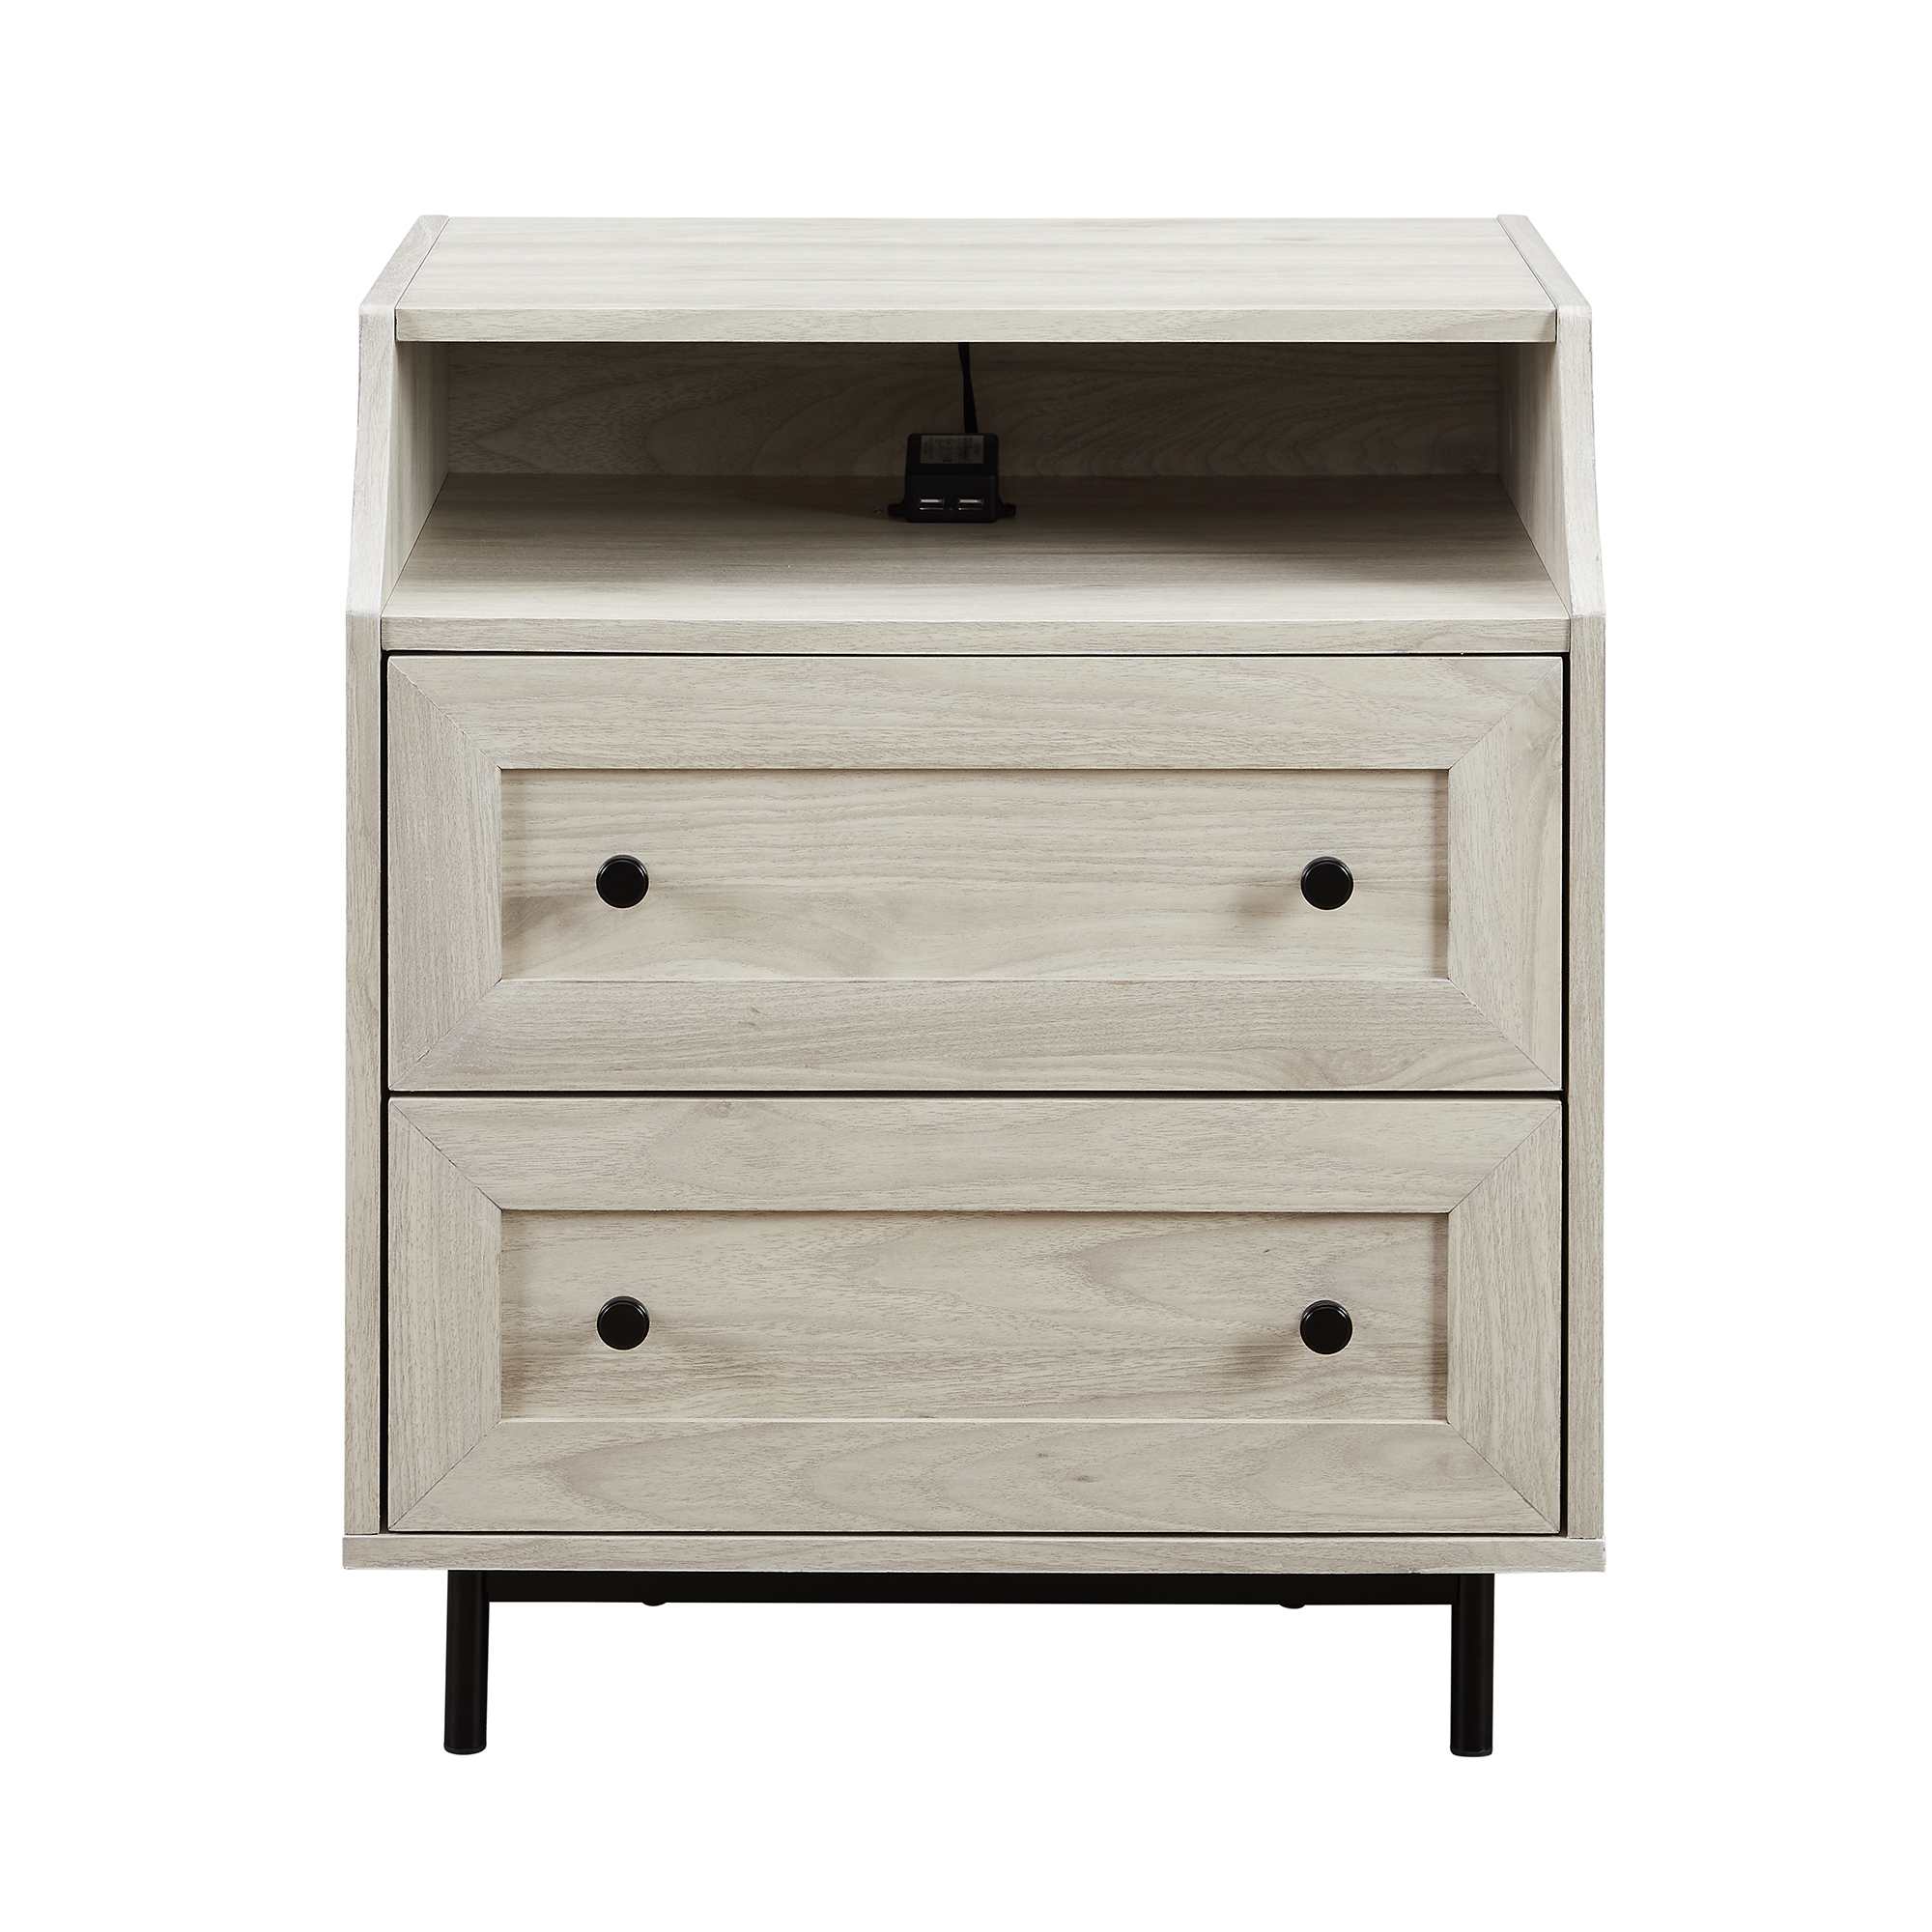 Welsh 22" Curved Open Top 2 Drawer Nightstand with USB - Birch - Image 2